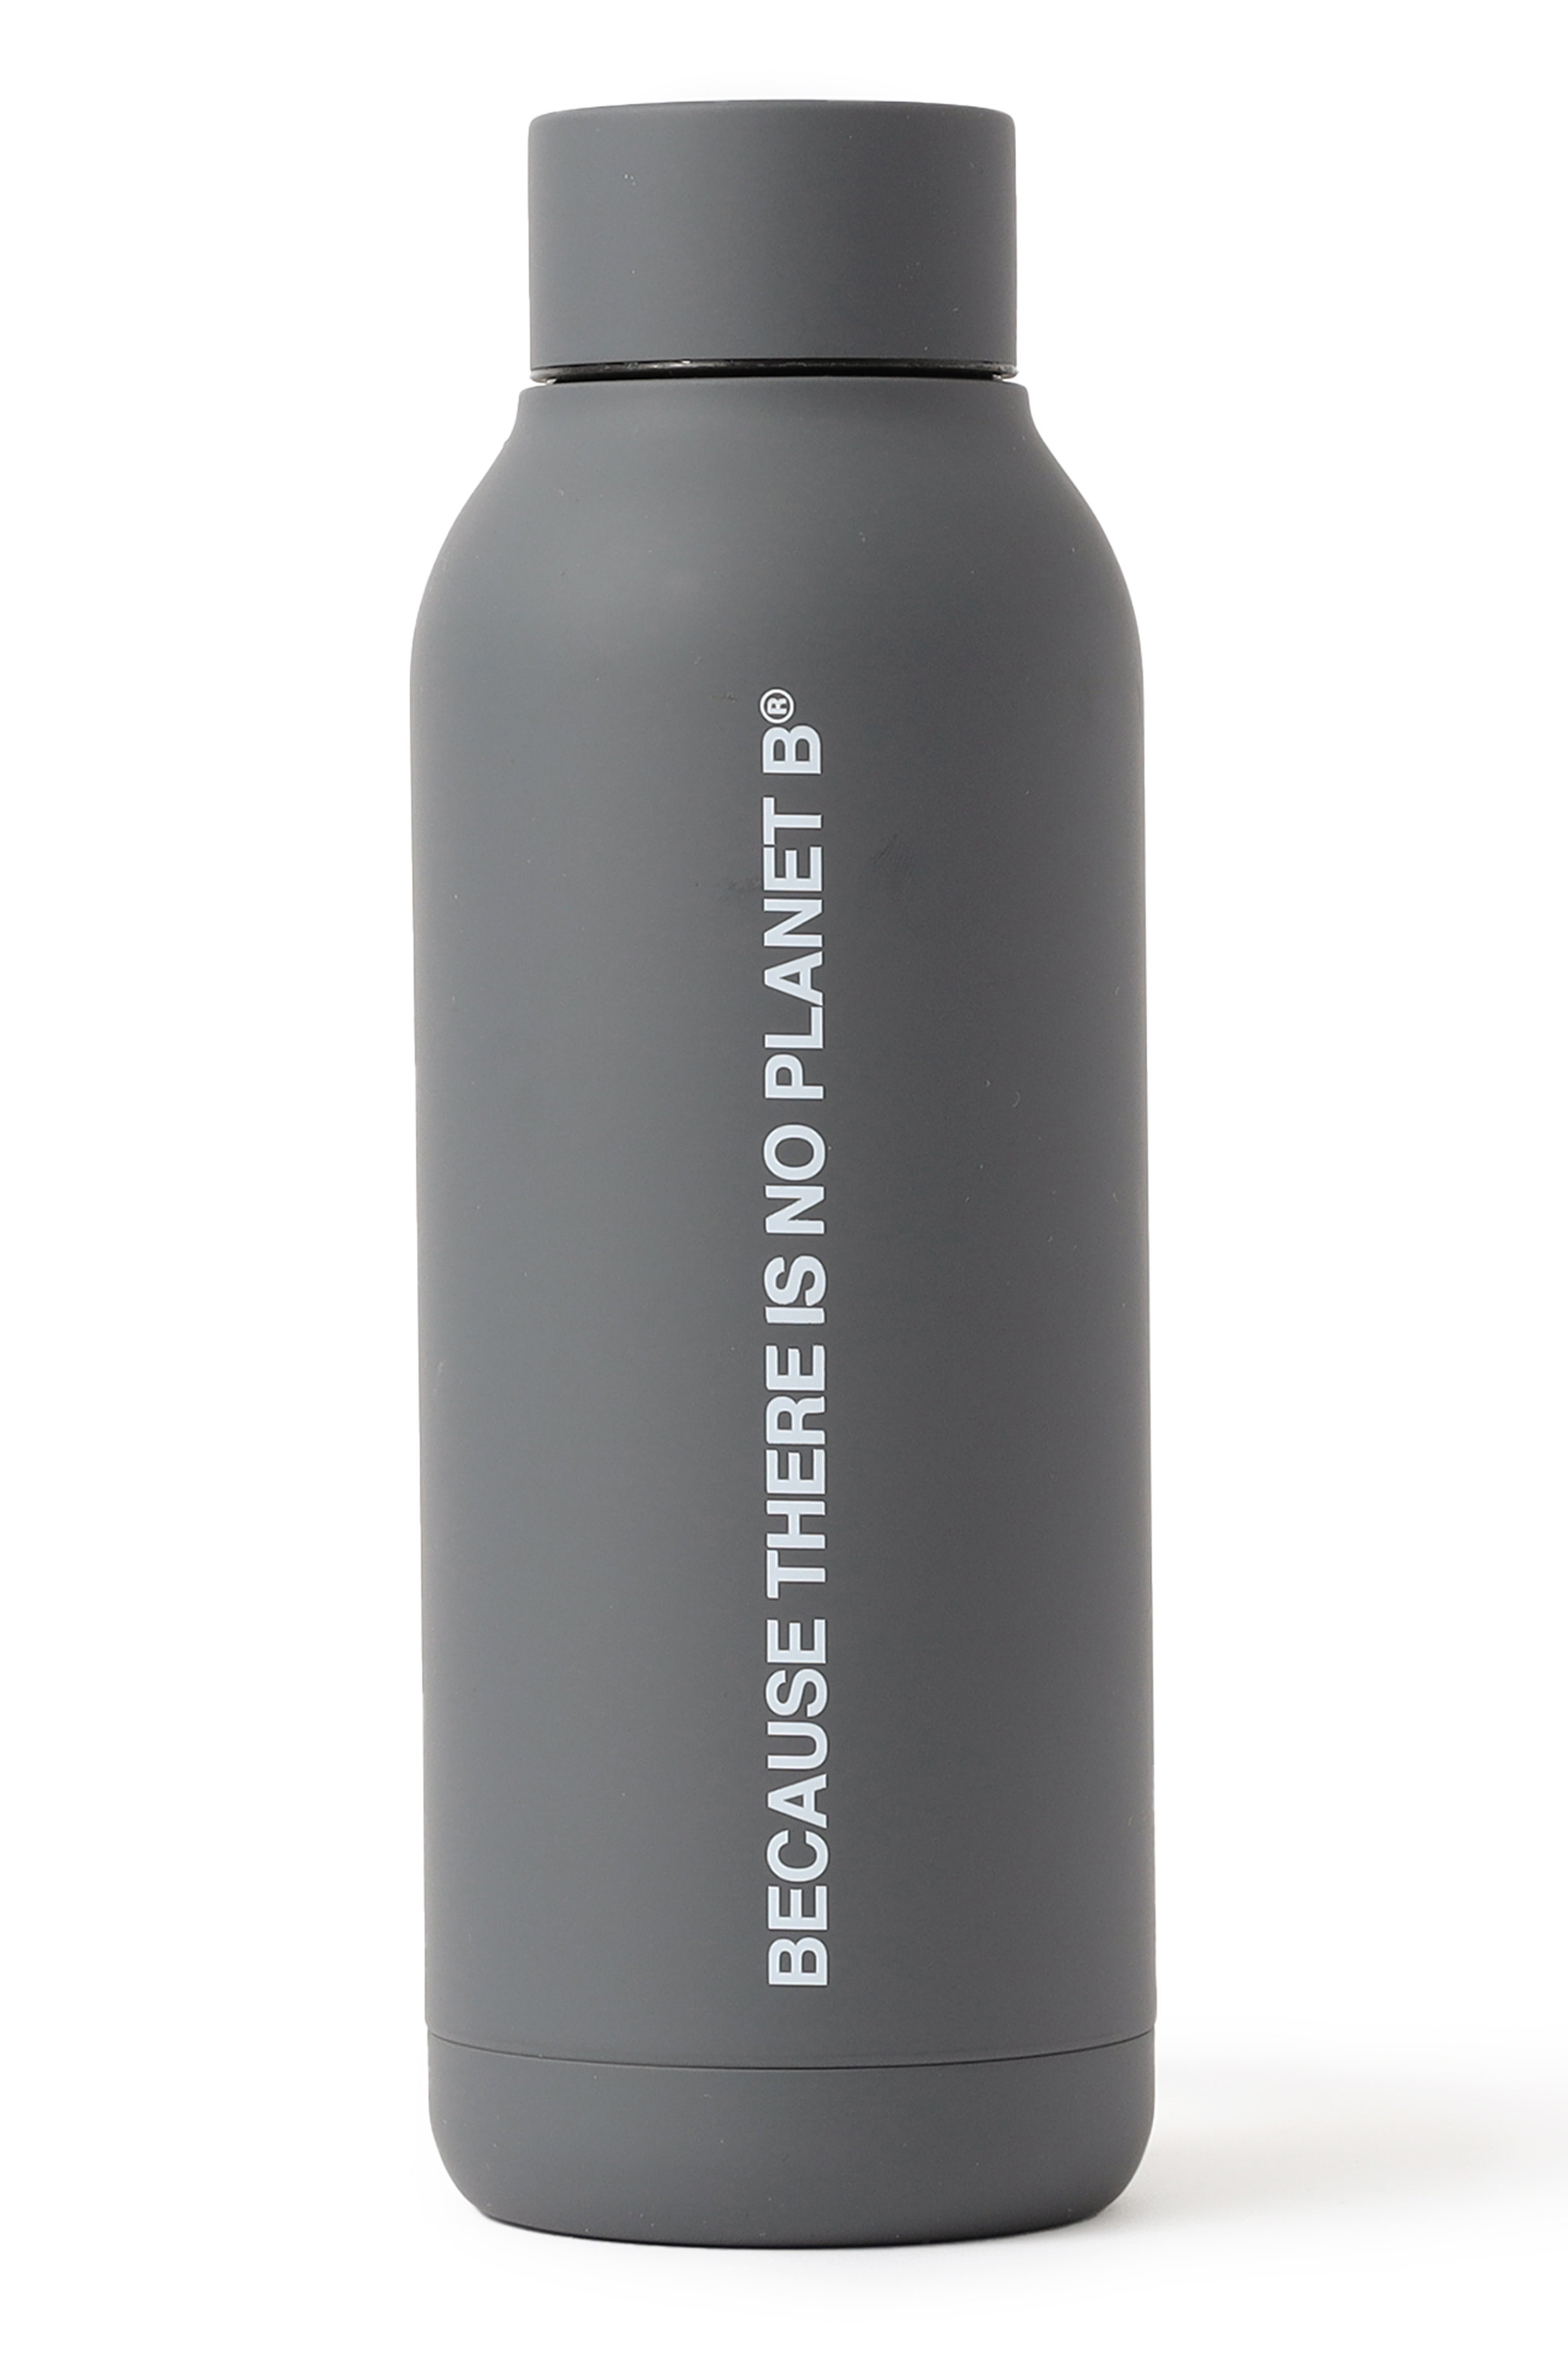 【UNISEX】BECAUSE ボトル / BECAUSE STAINLESS STEEL BOTTLE